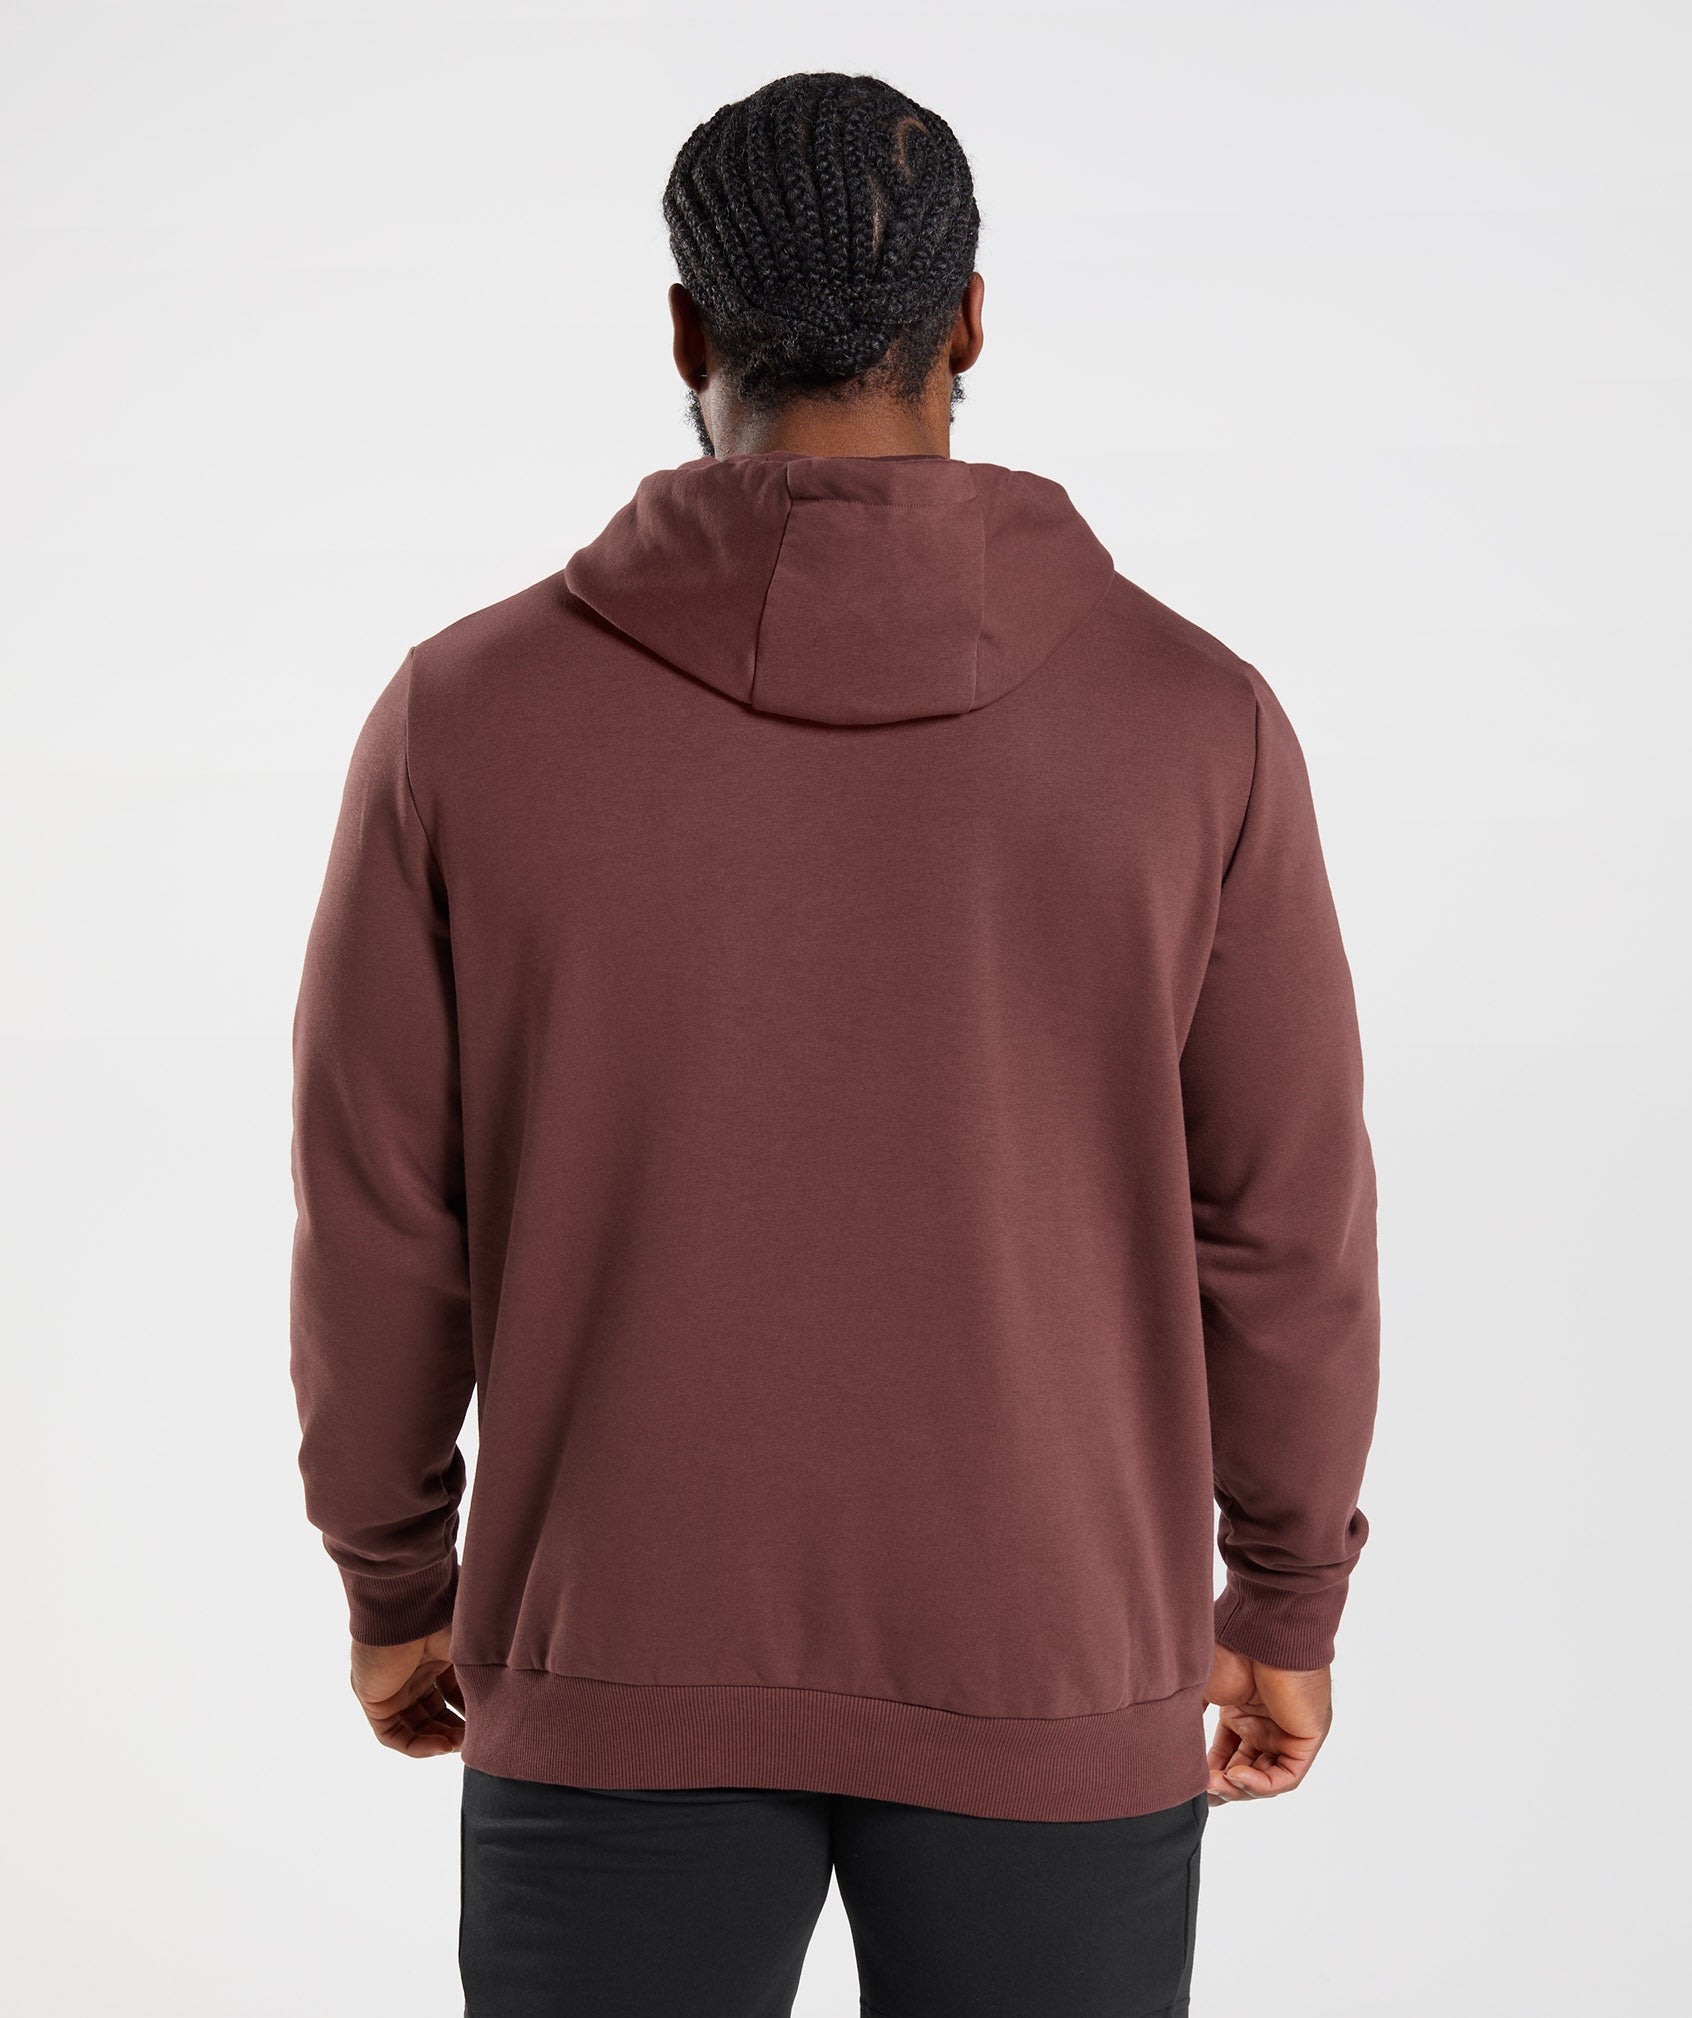 Sharkhead Infill Hoodie in Cherry Brown - view 2